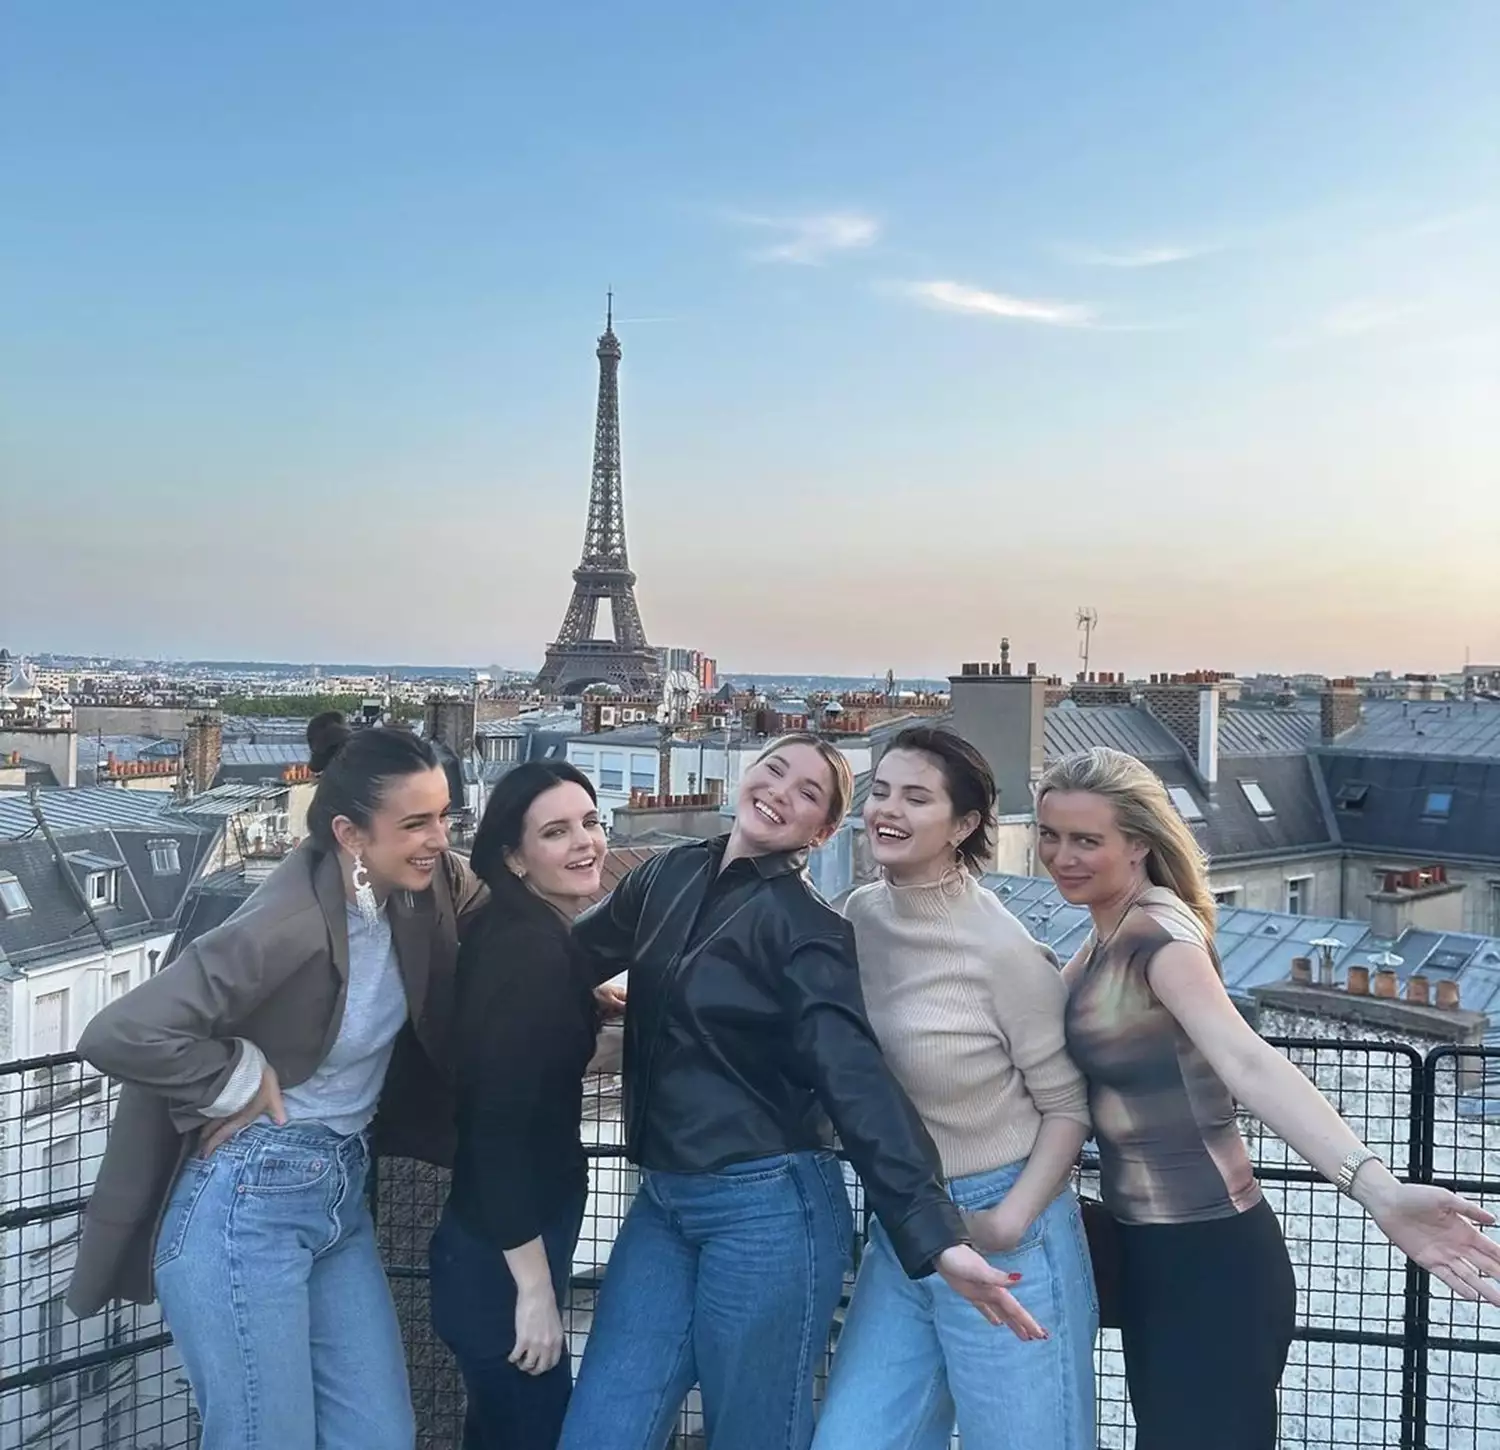 Selena Gomez Shares 'Two Months' In Paris 'Changed Her Life' - See The Photos